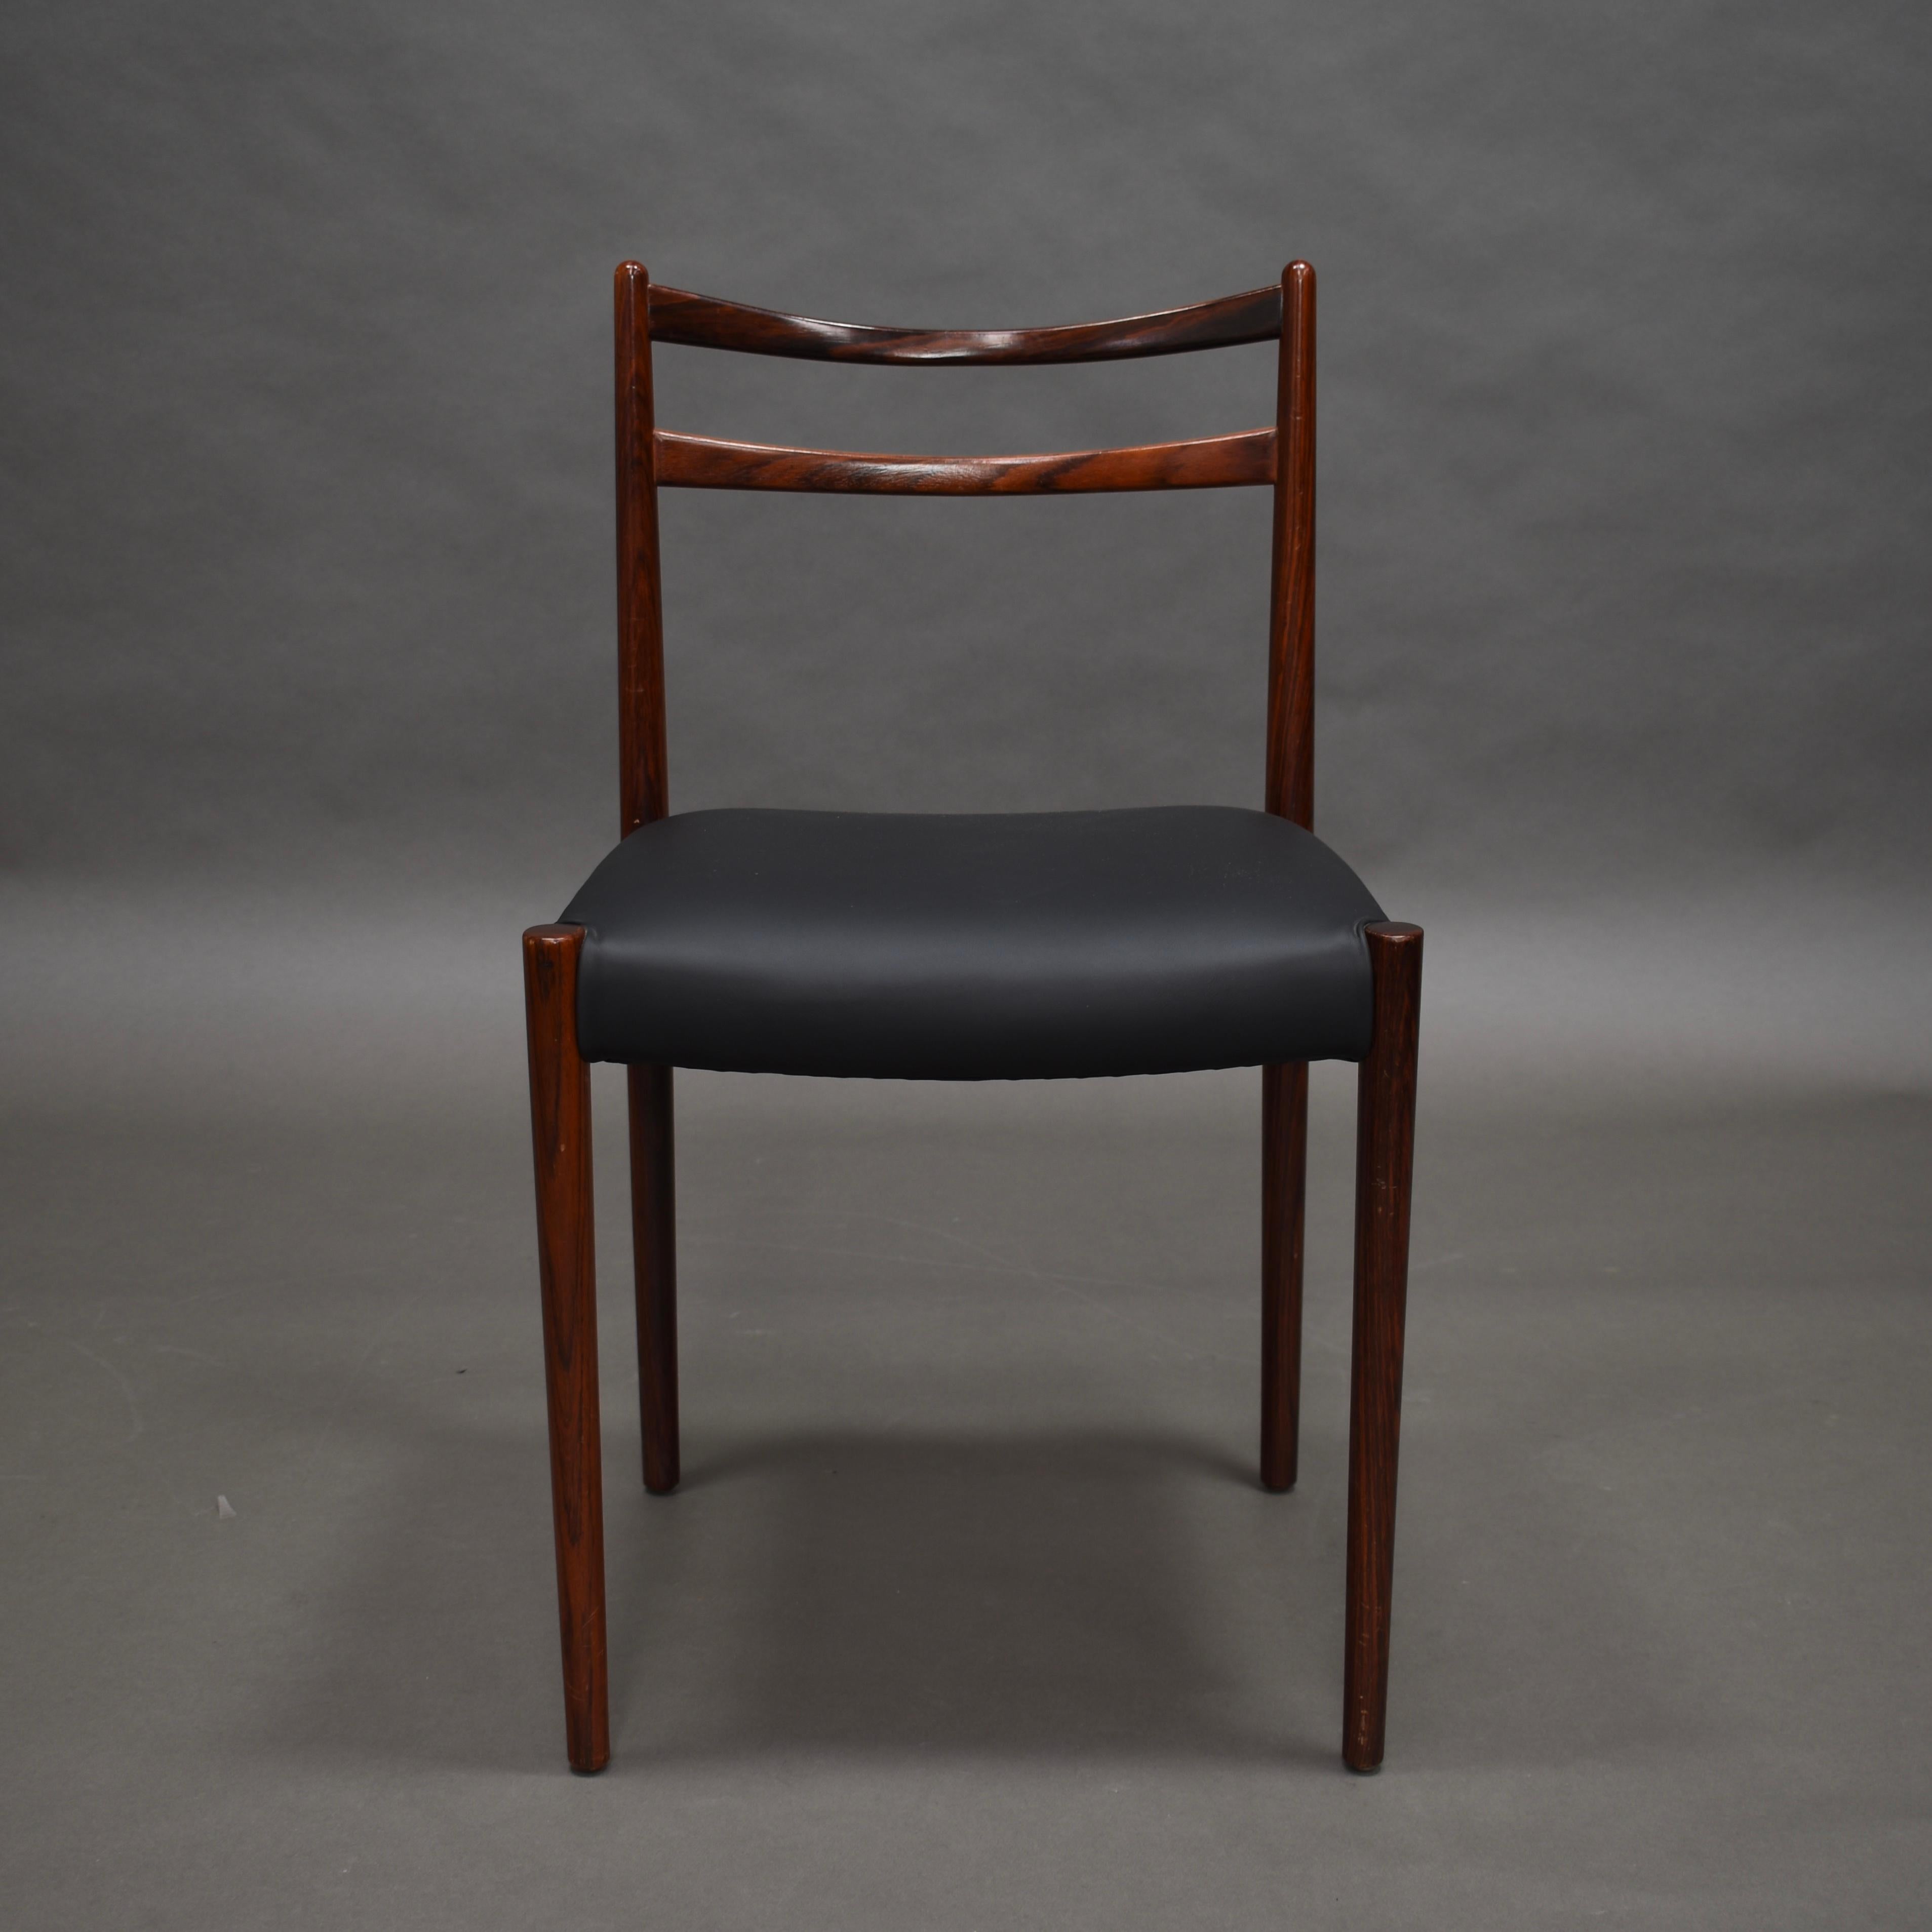 Mid-20th Century Danish Brazilian Rosewood Dining Chairs in New Black Leather, Denmark, 1950s